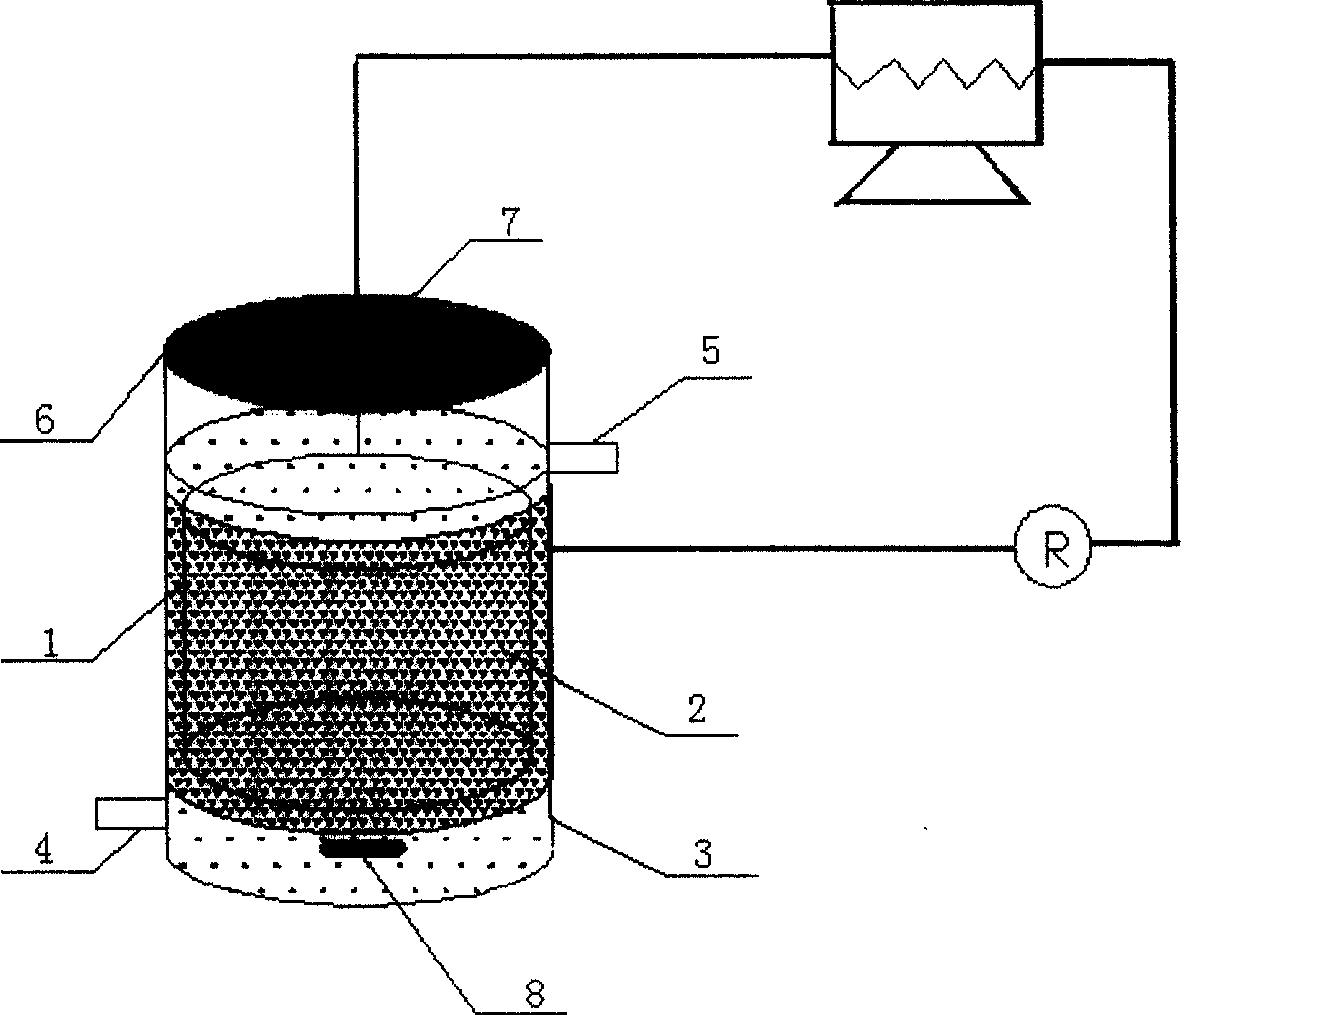 Single cell microbiological fuel cell with gaseous diffusion electrode as cathode